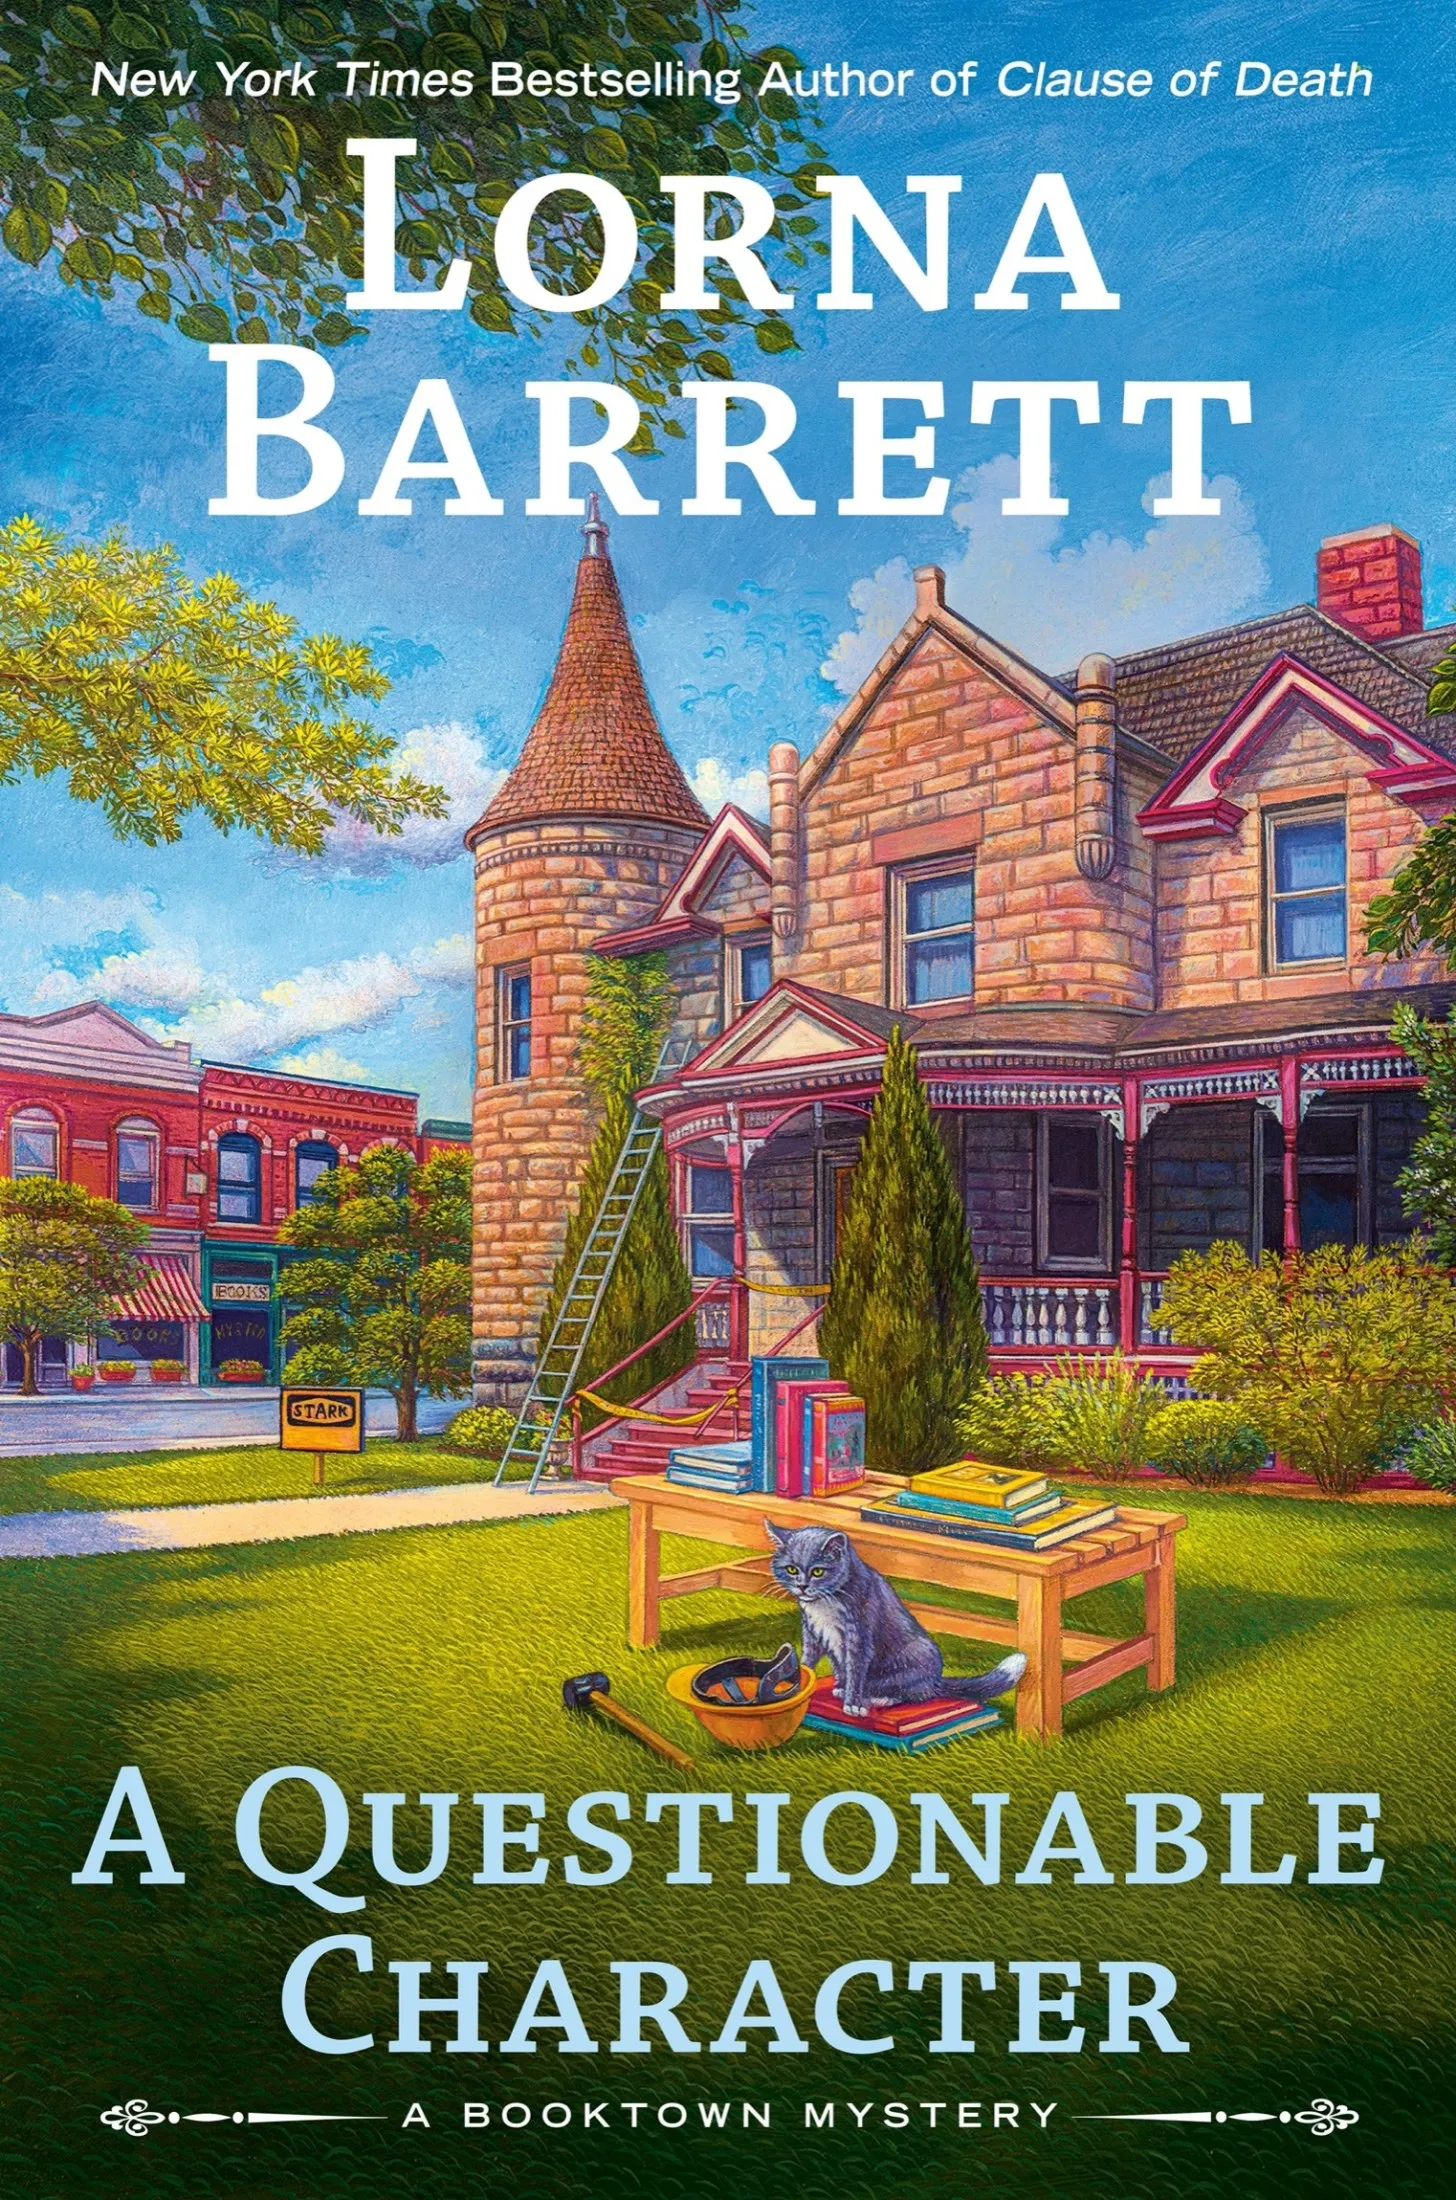 A Questionable Character (A Booktown Mystery #17)